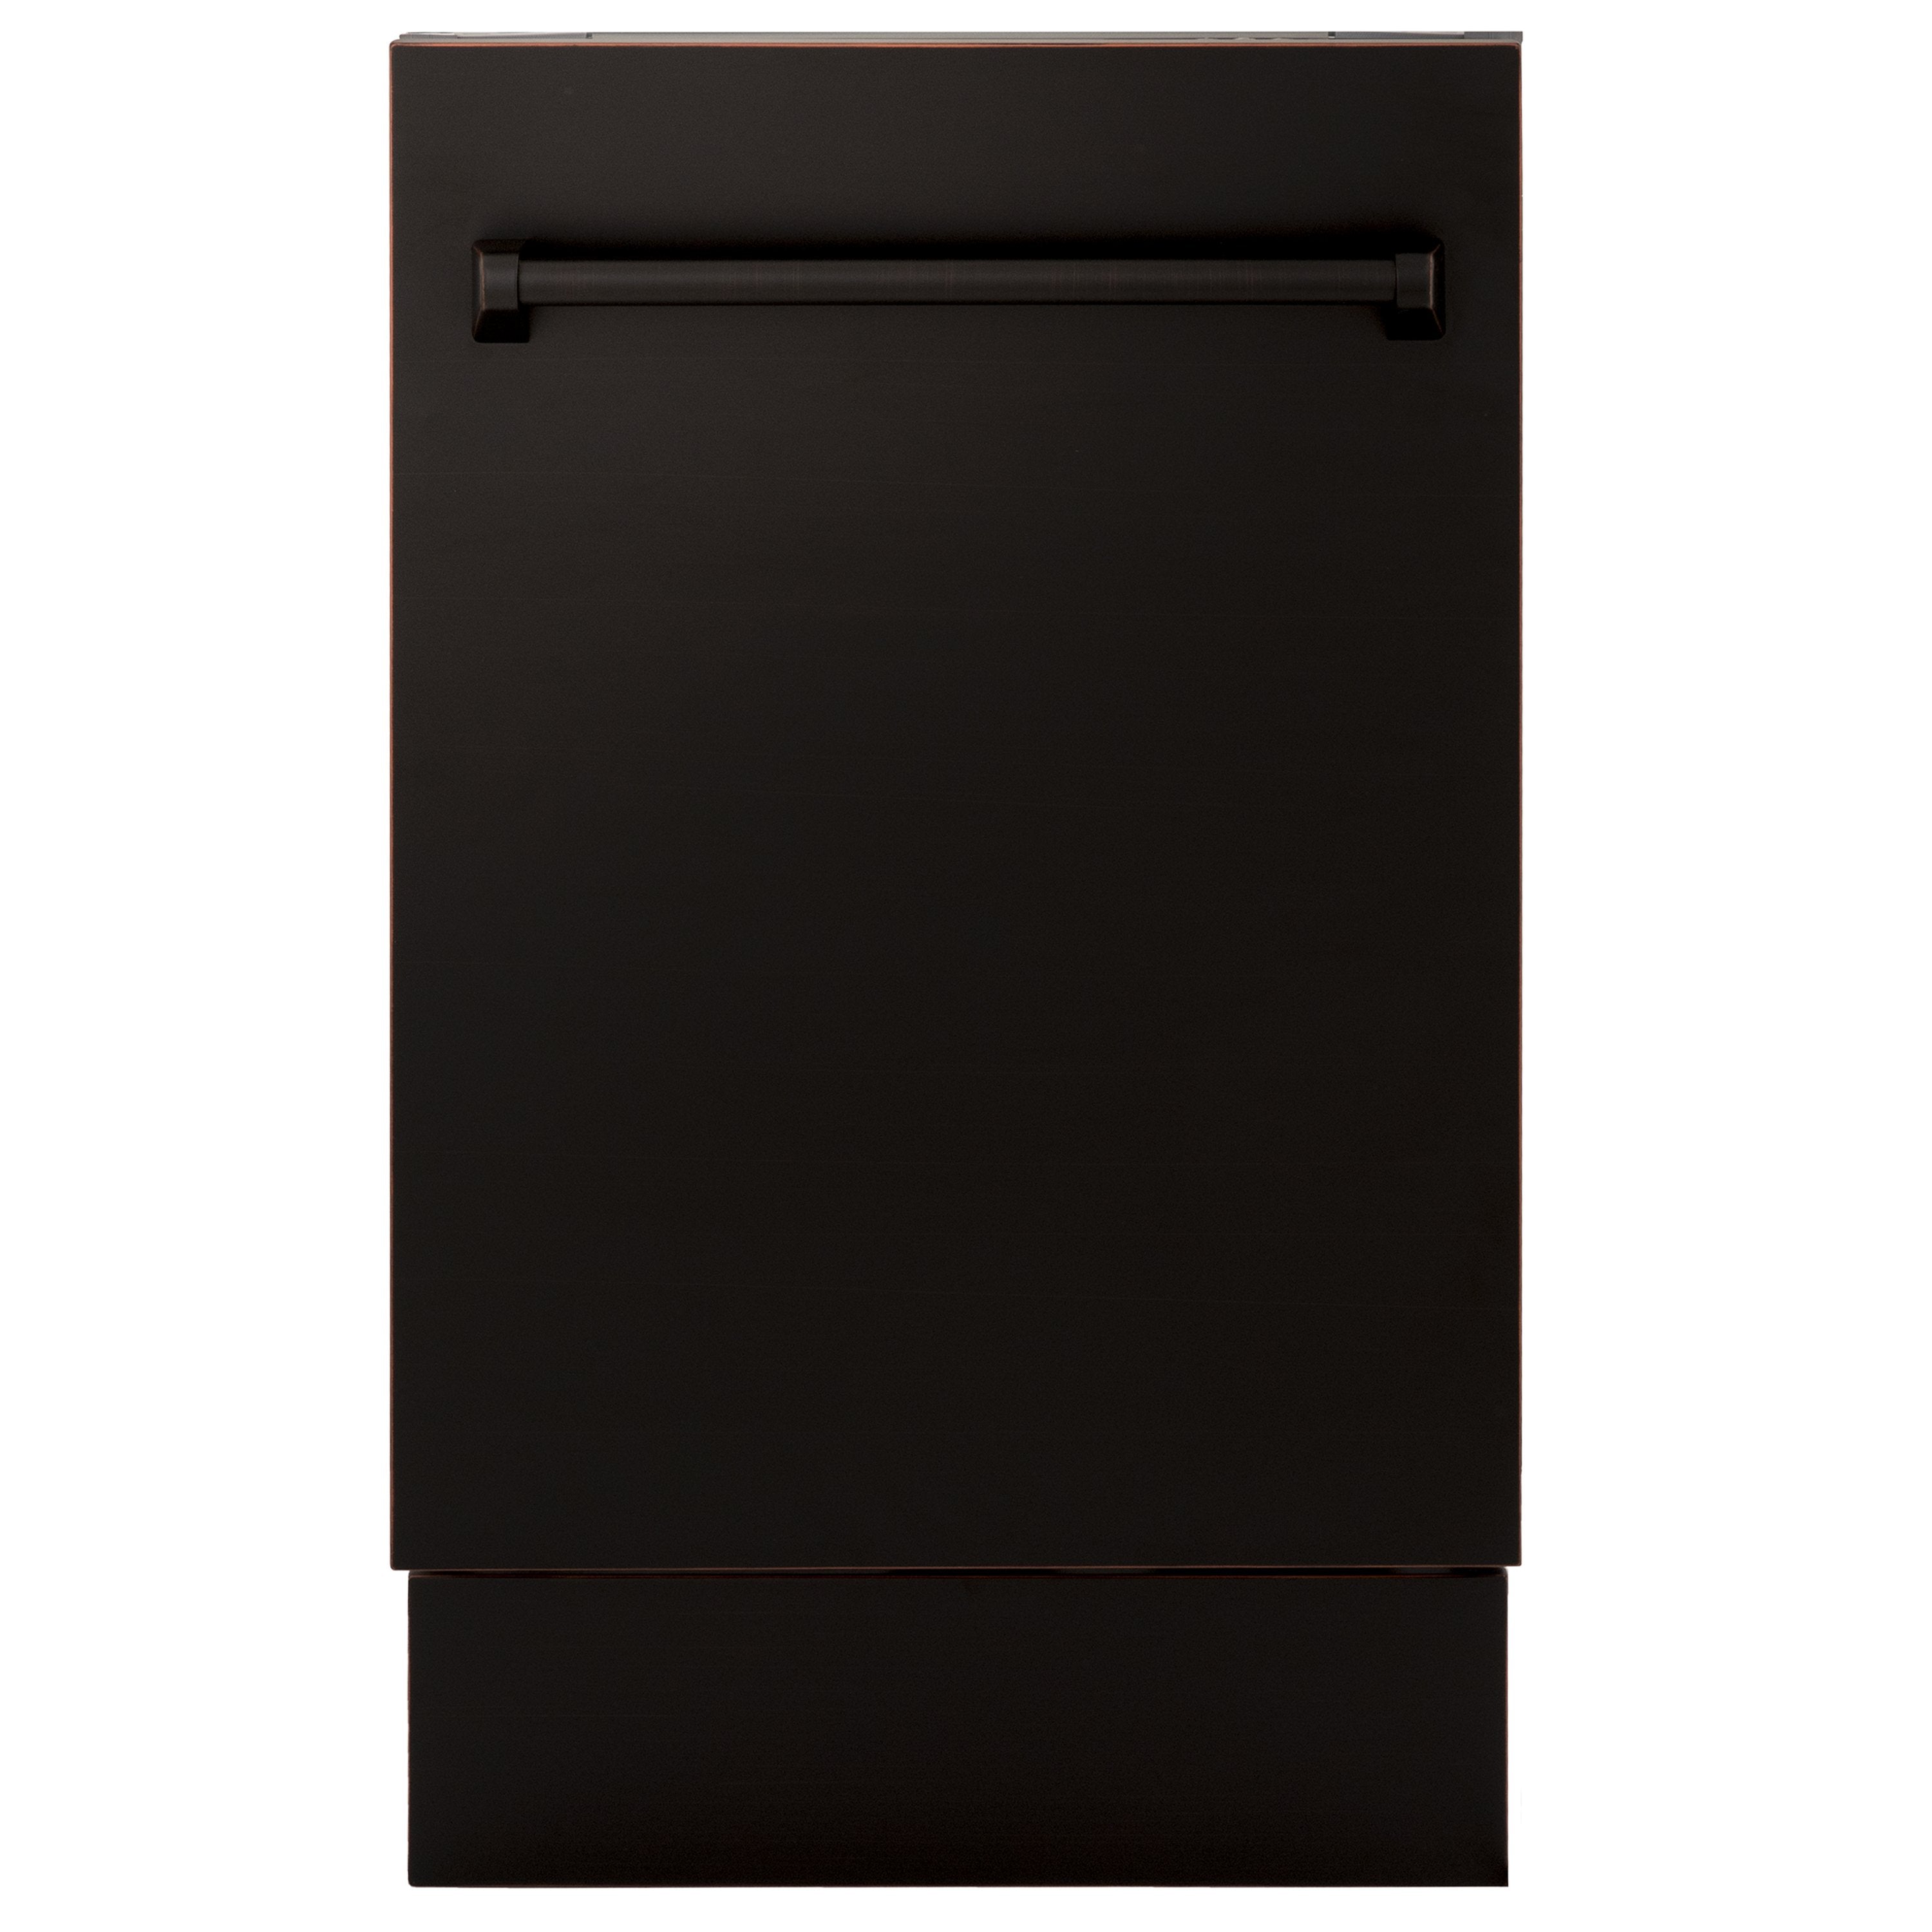 ZLINE 18 in. Top Control Tall Dishwasher in Oil Rubbed Bronze with 3rd Rack 1